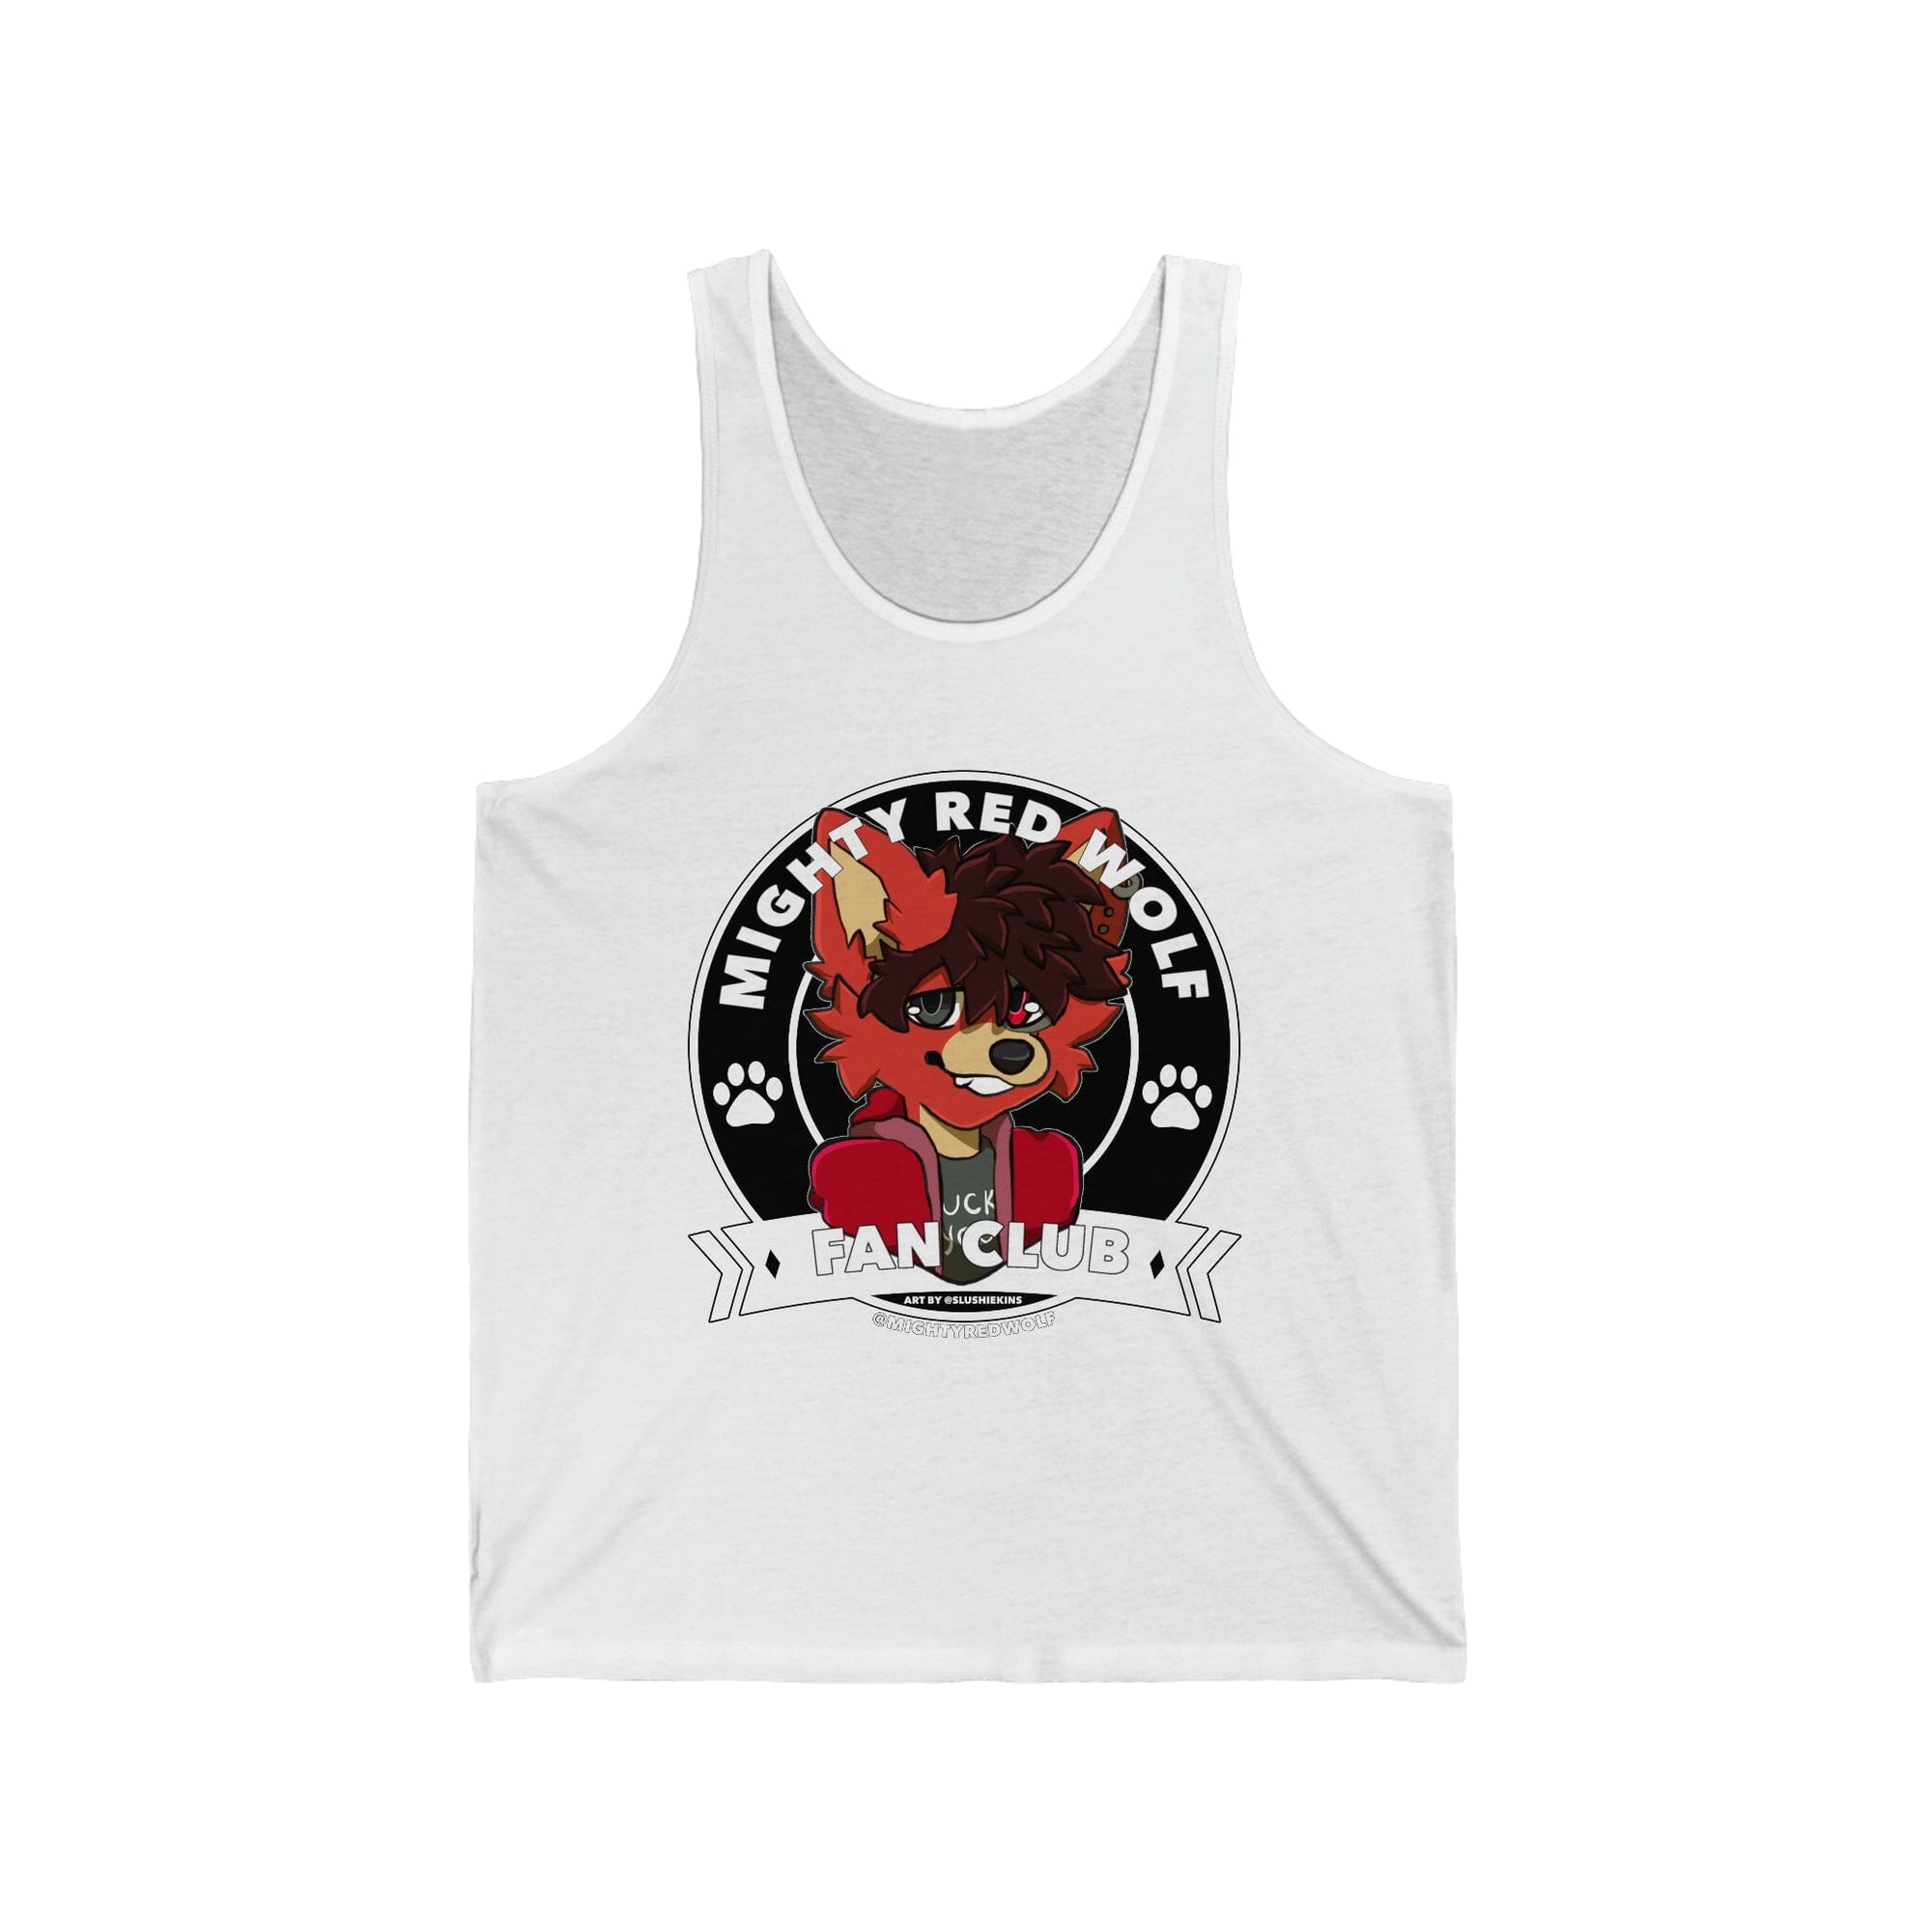 MRW Fanclub - Tank Top Tank Top AFLT-Mighty-Red White XS 